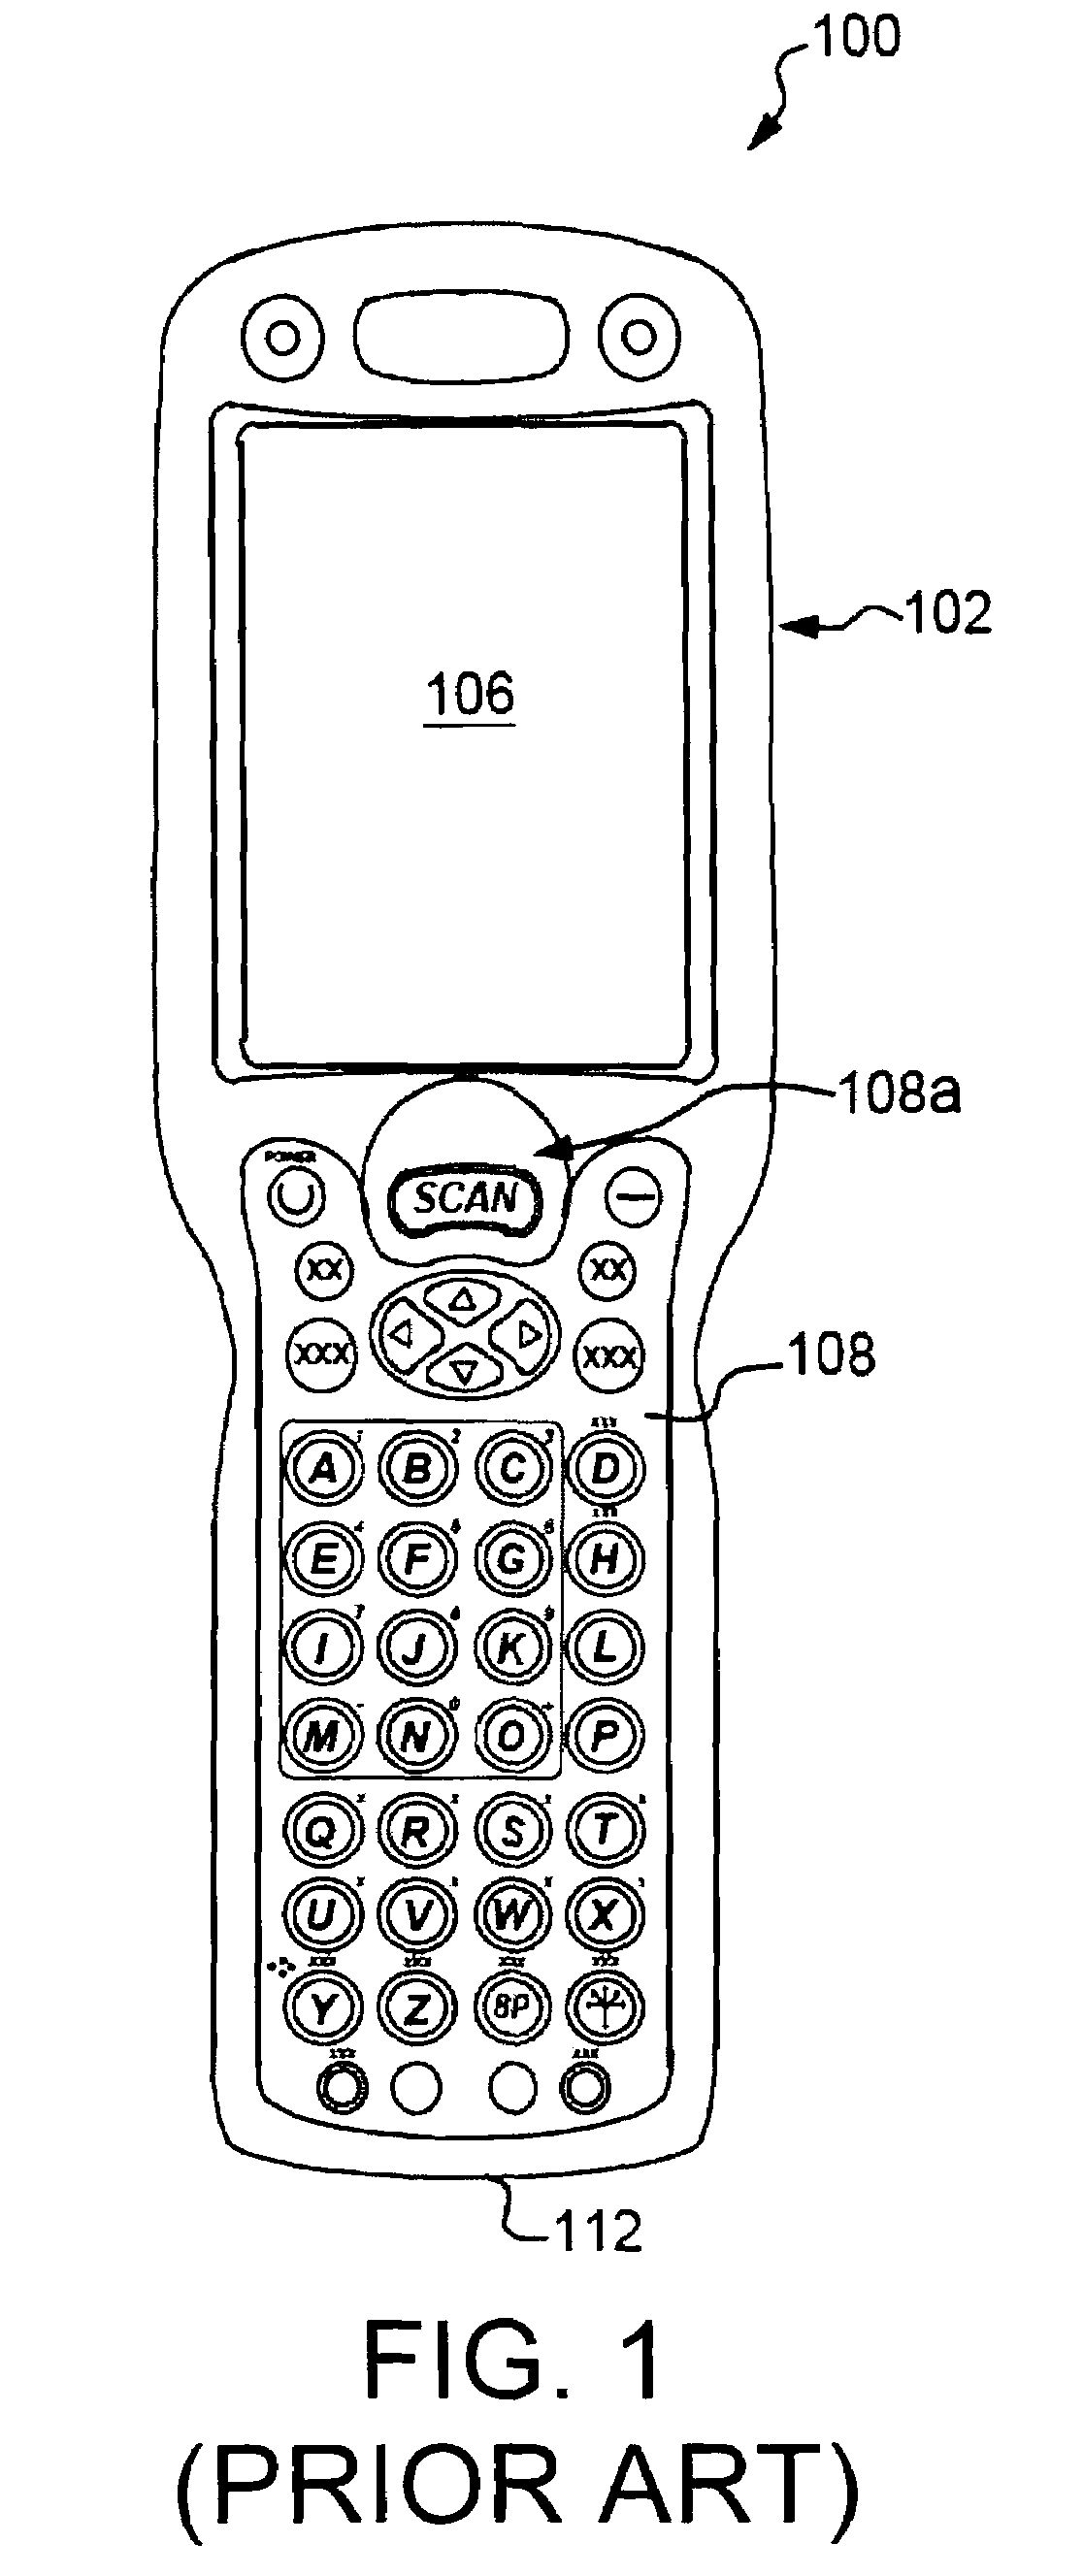 Power management apparatus and methods for portable data terminals